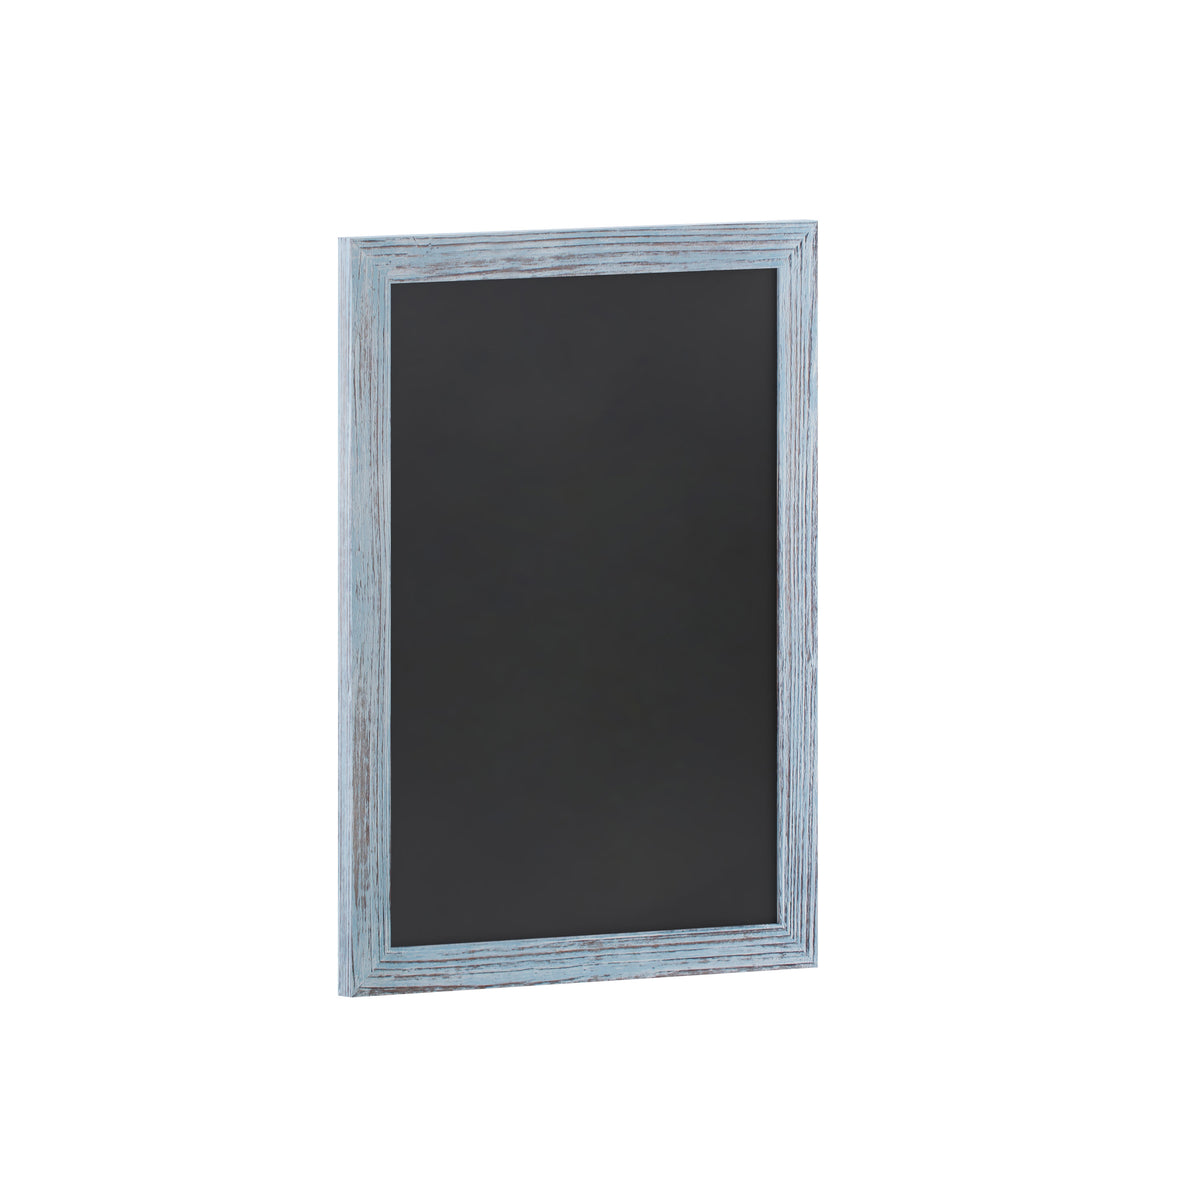 Rustic Blue,18inchW x 0.75inchD x 24inchH |#| 18inch x 24inch Wall Mounted Magnetic Chalkboard with Wooden Frame - Rustic Blue